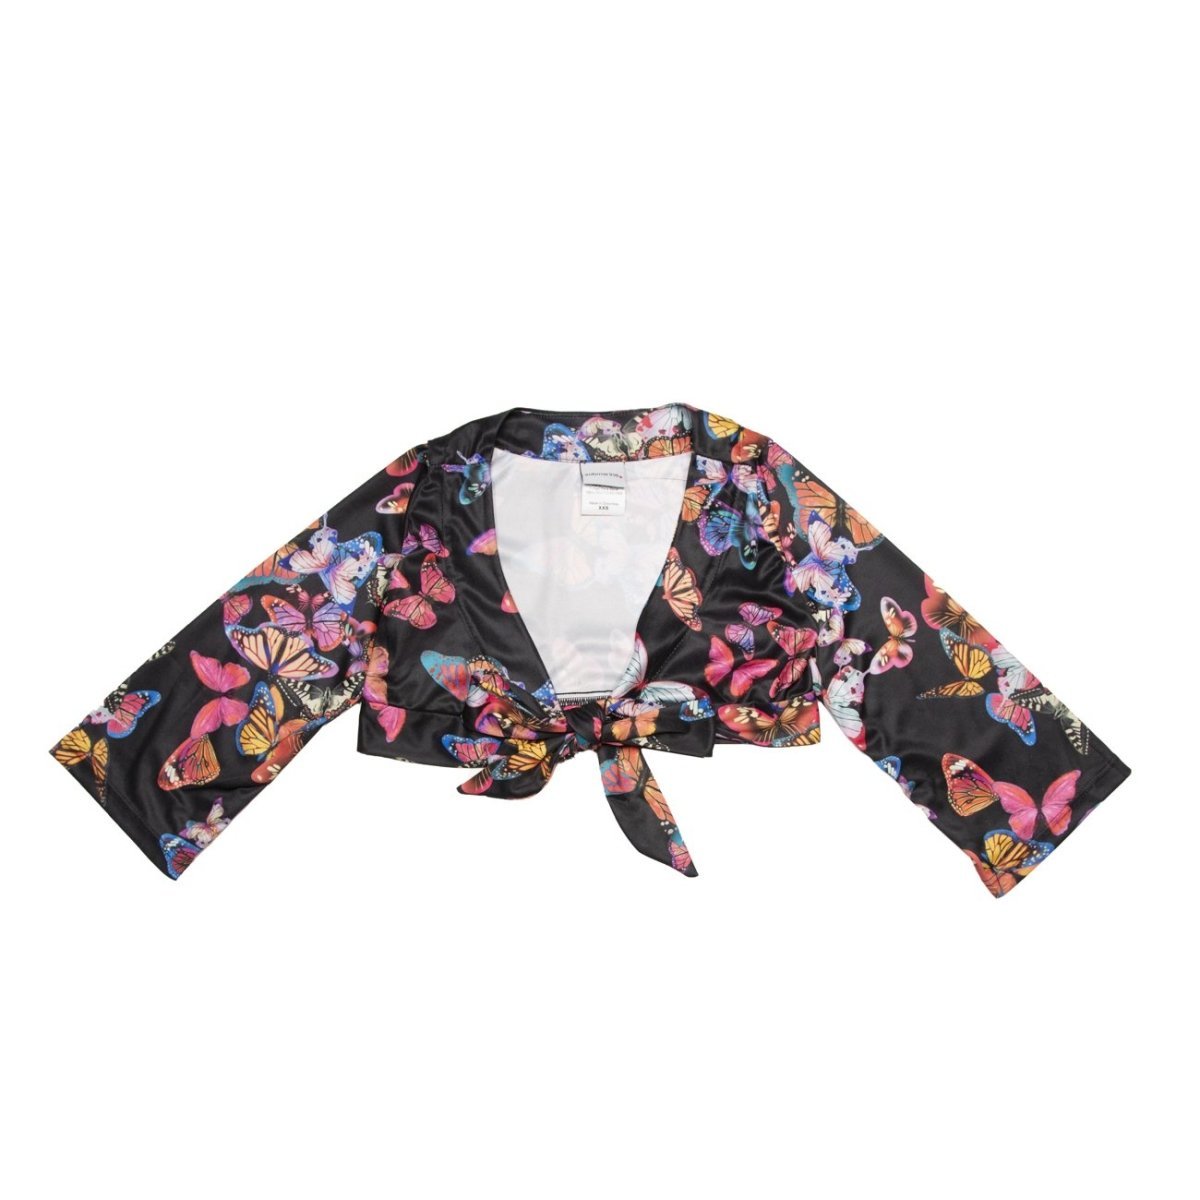 FLY AWAY BUTTERFLY WRAP TOP - LONG SLEEVE TOPS